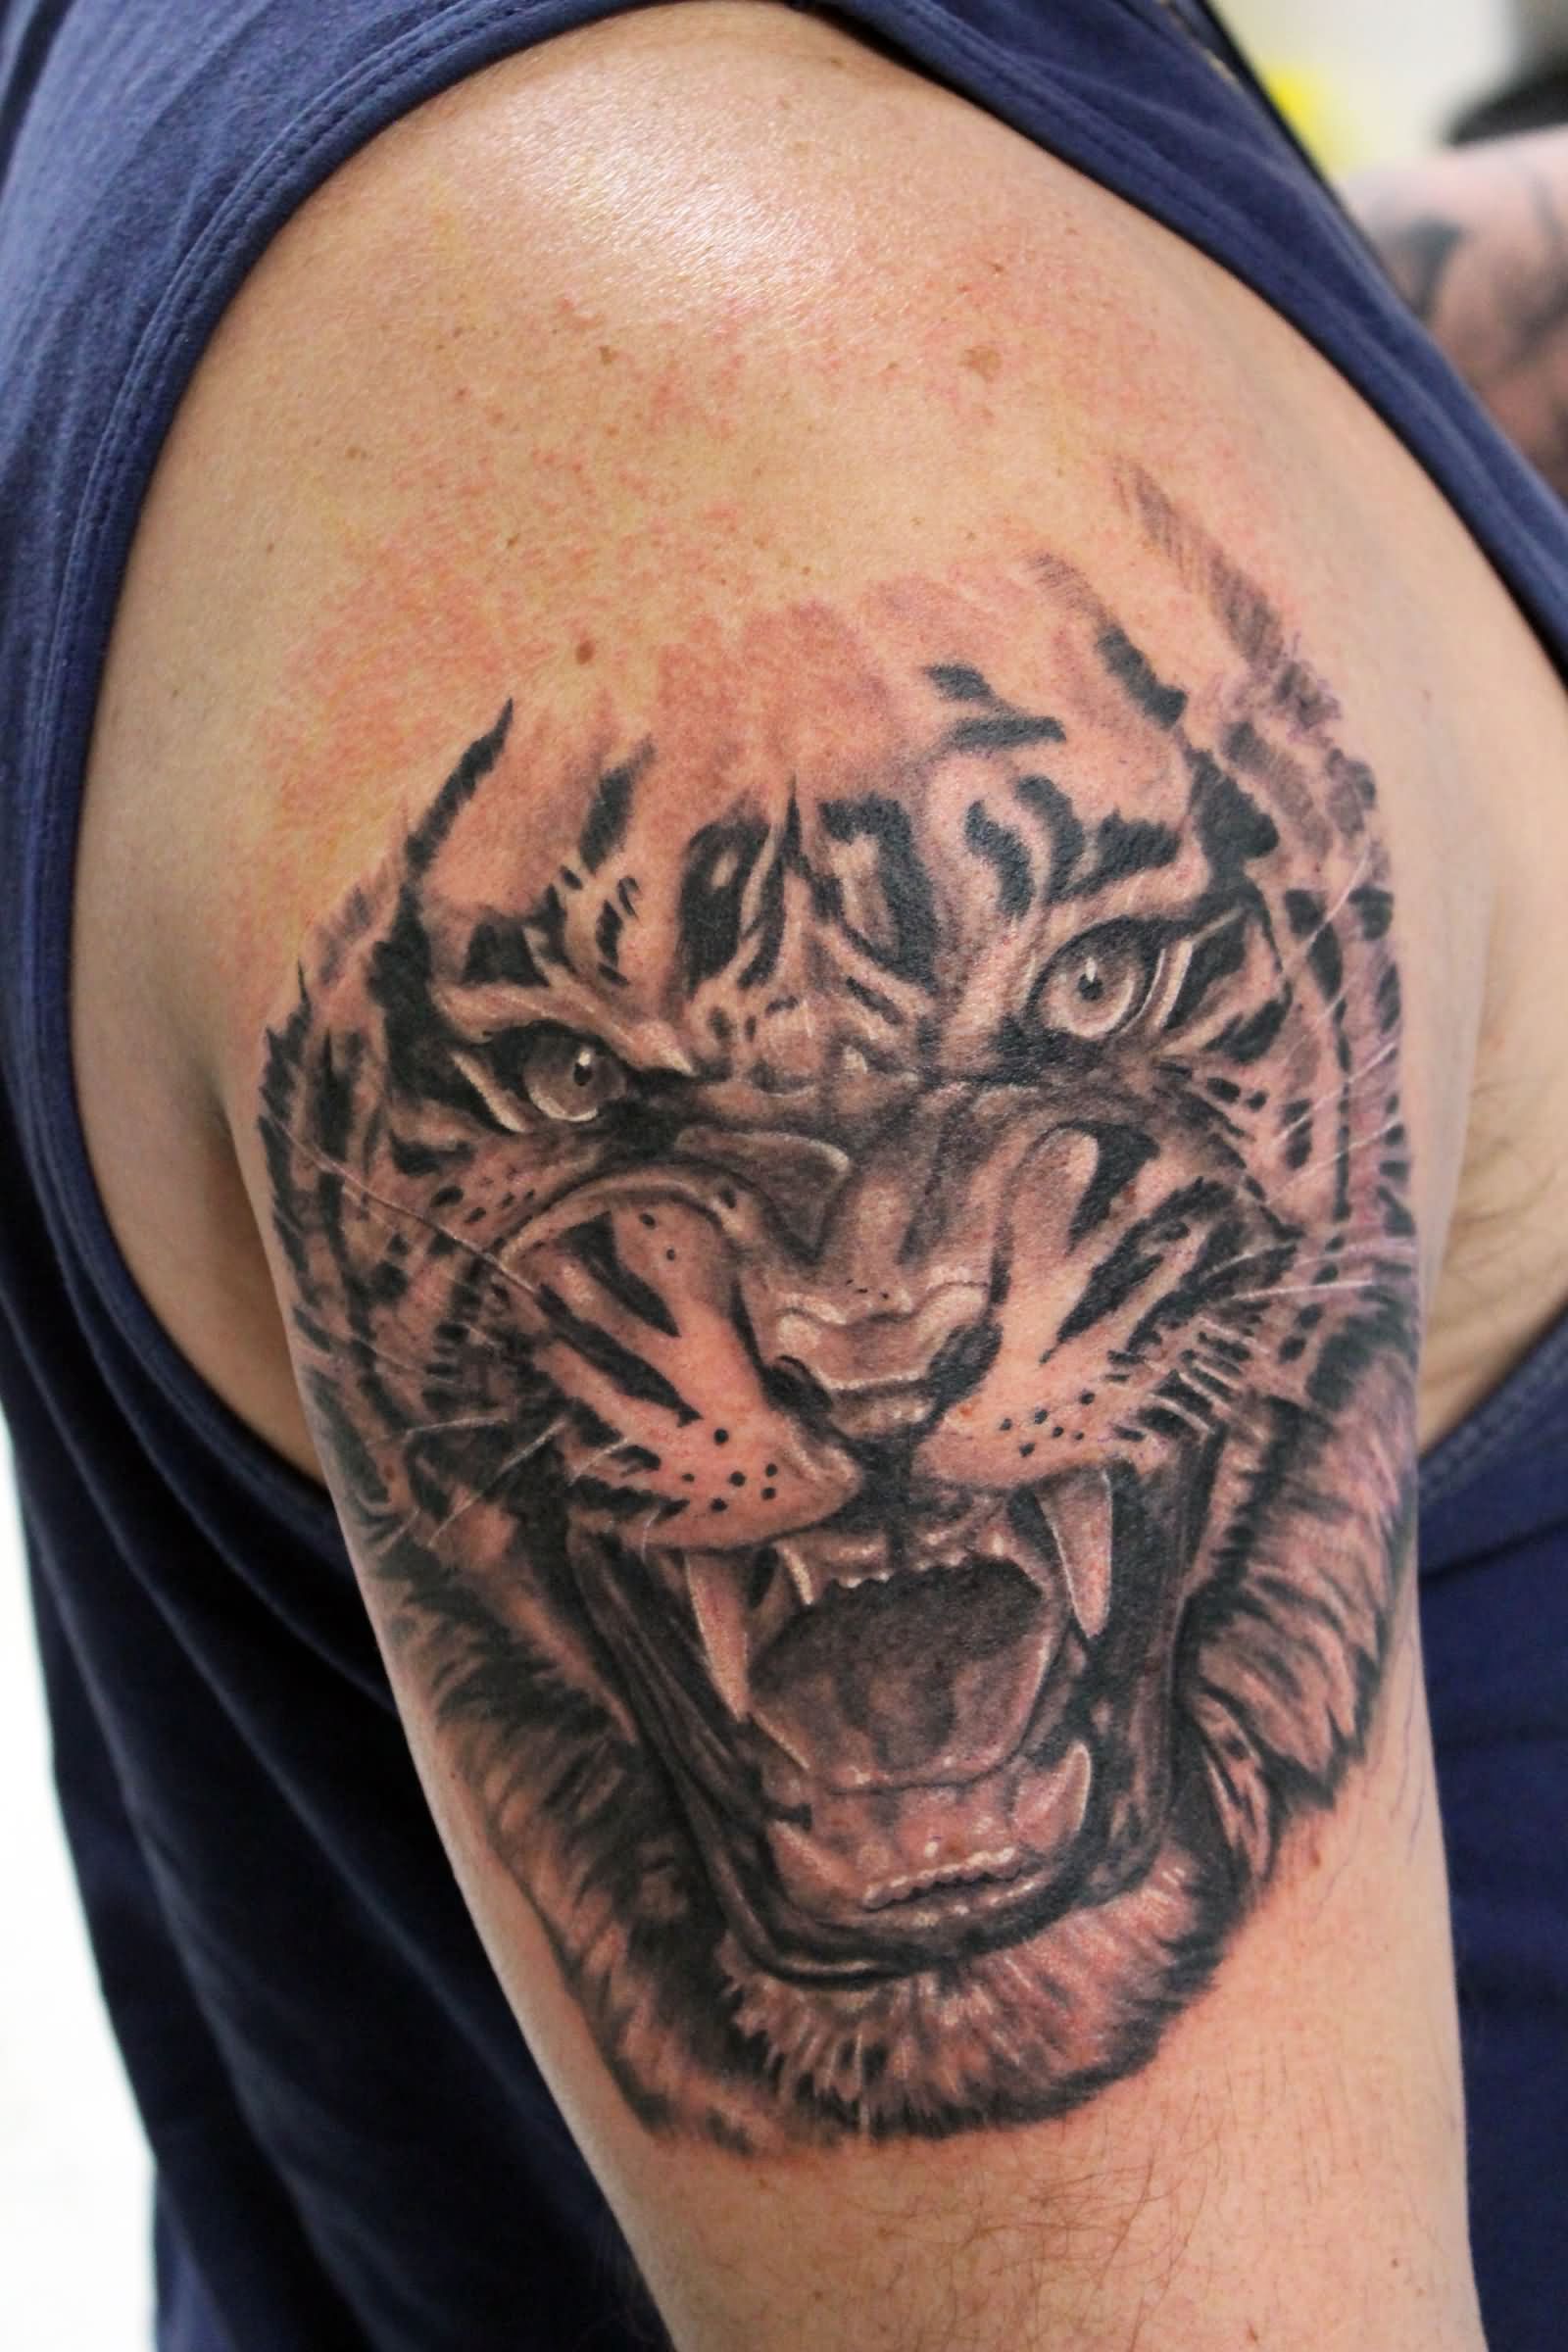 Grey Ink Roaring Tiger Tattoo On Half Sleeve By Jesus Sanchez at Wylde Sydes Tattoo